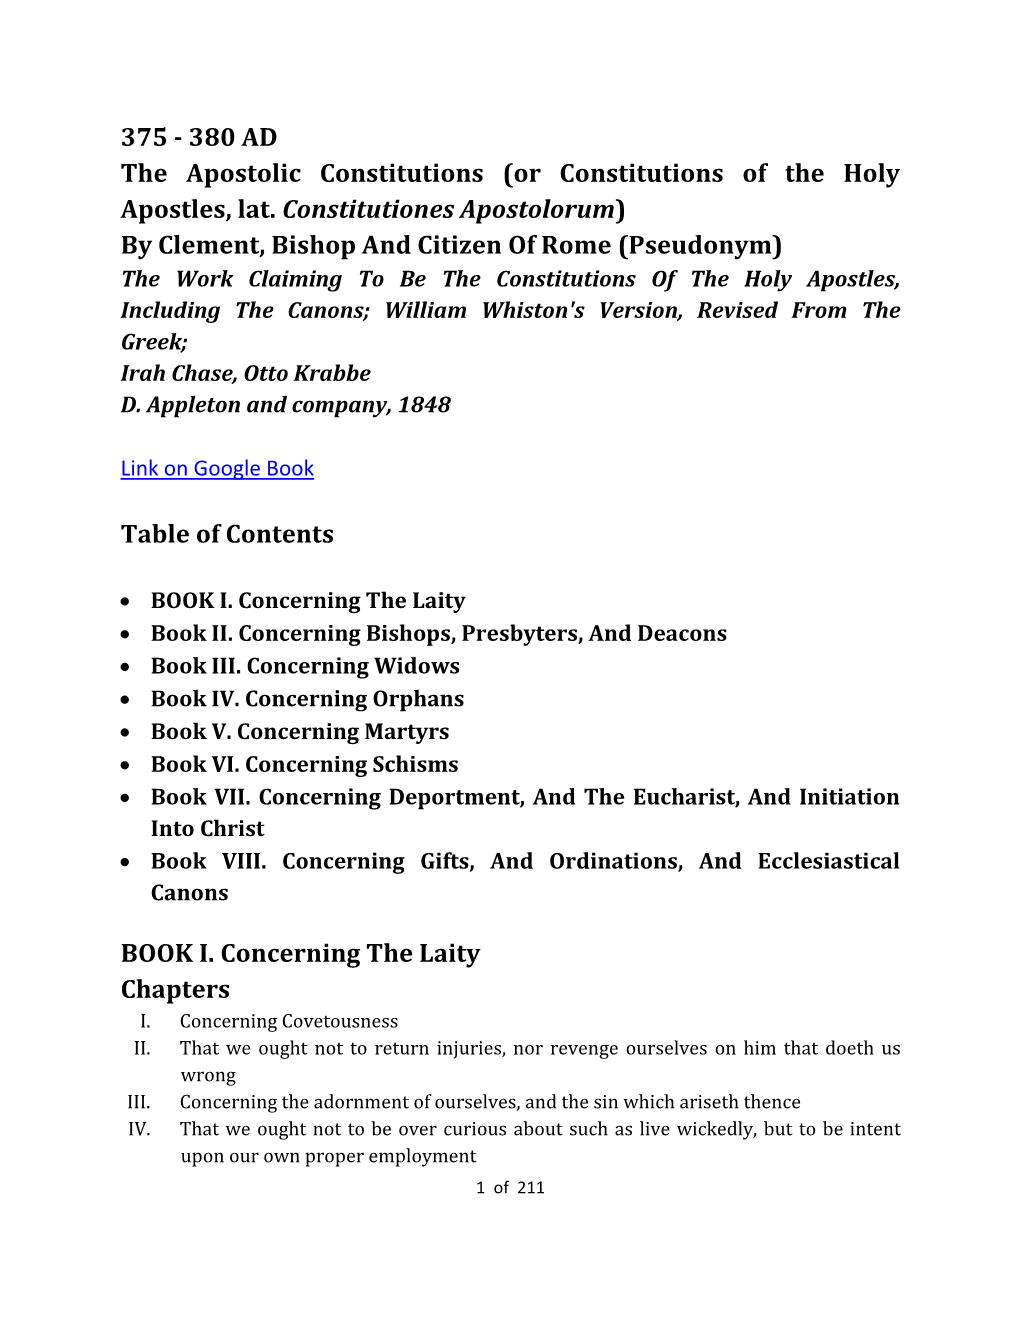 Apostolic Constitutions (Or Constitutions of the Holy Apostles, Lat